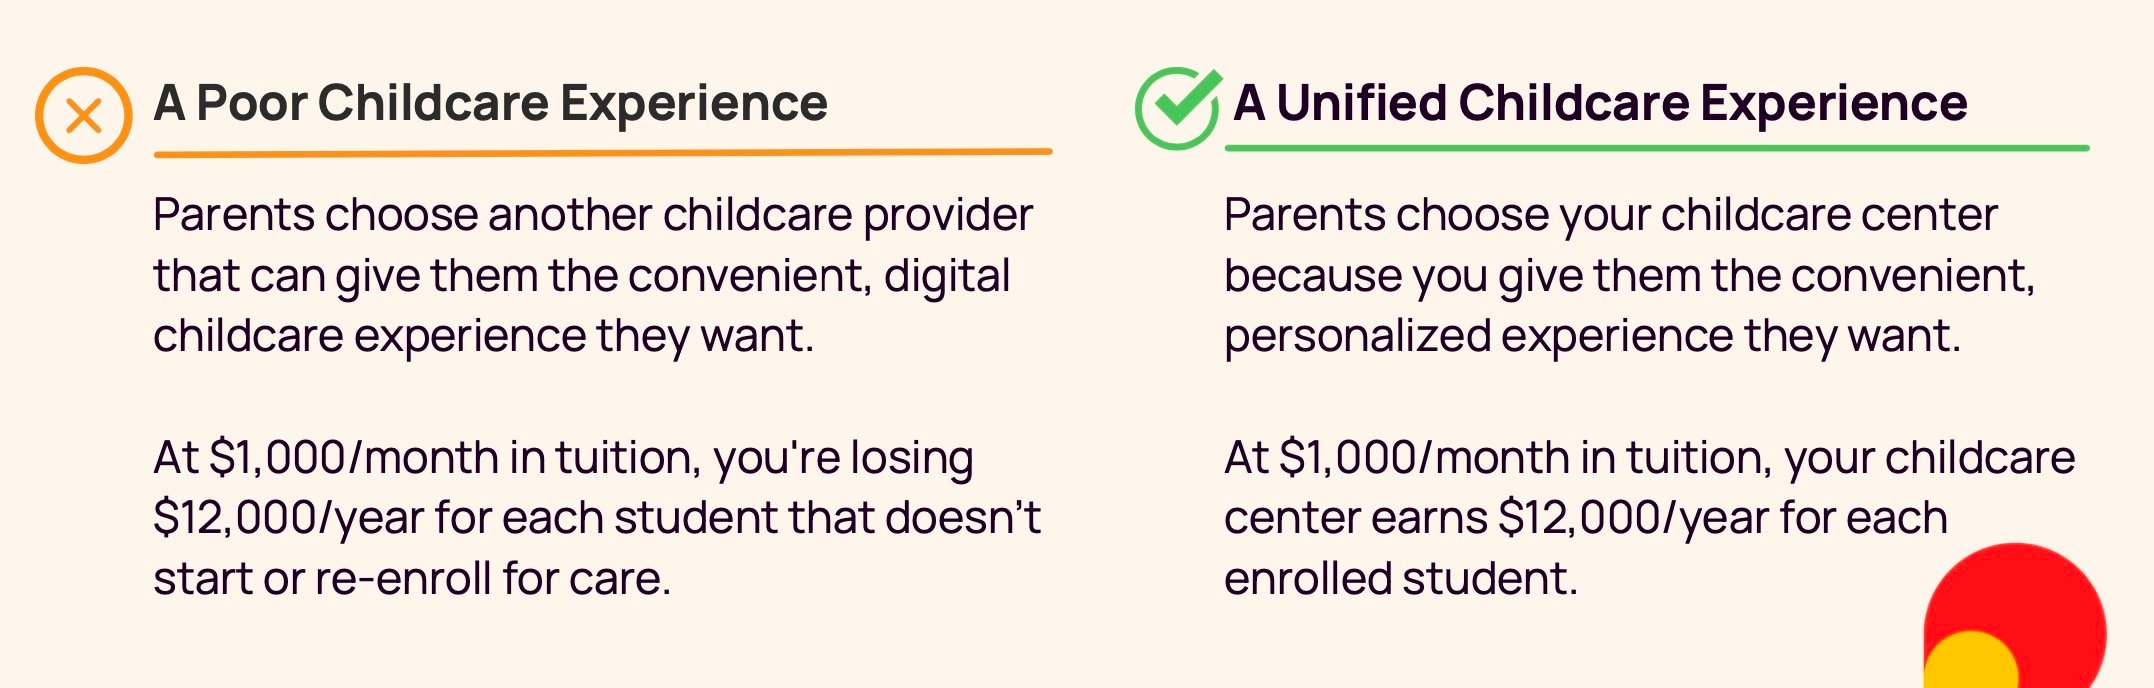 poor vs. unified childcare experience